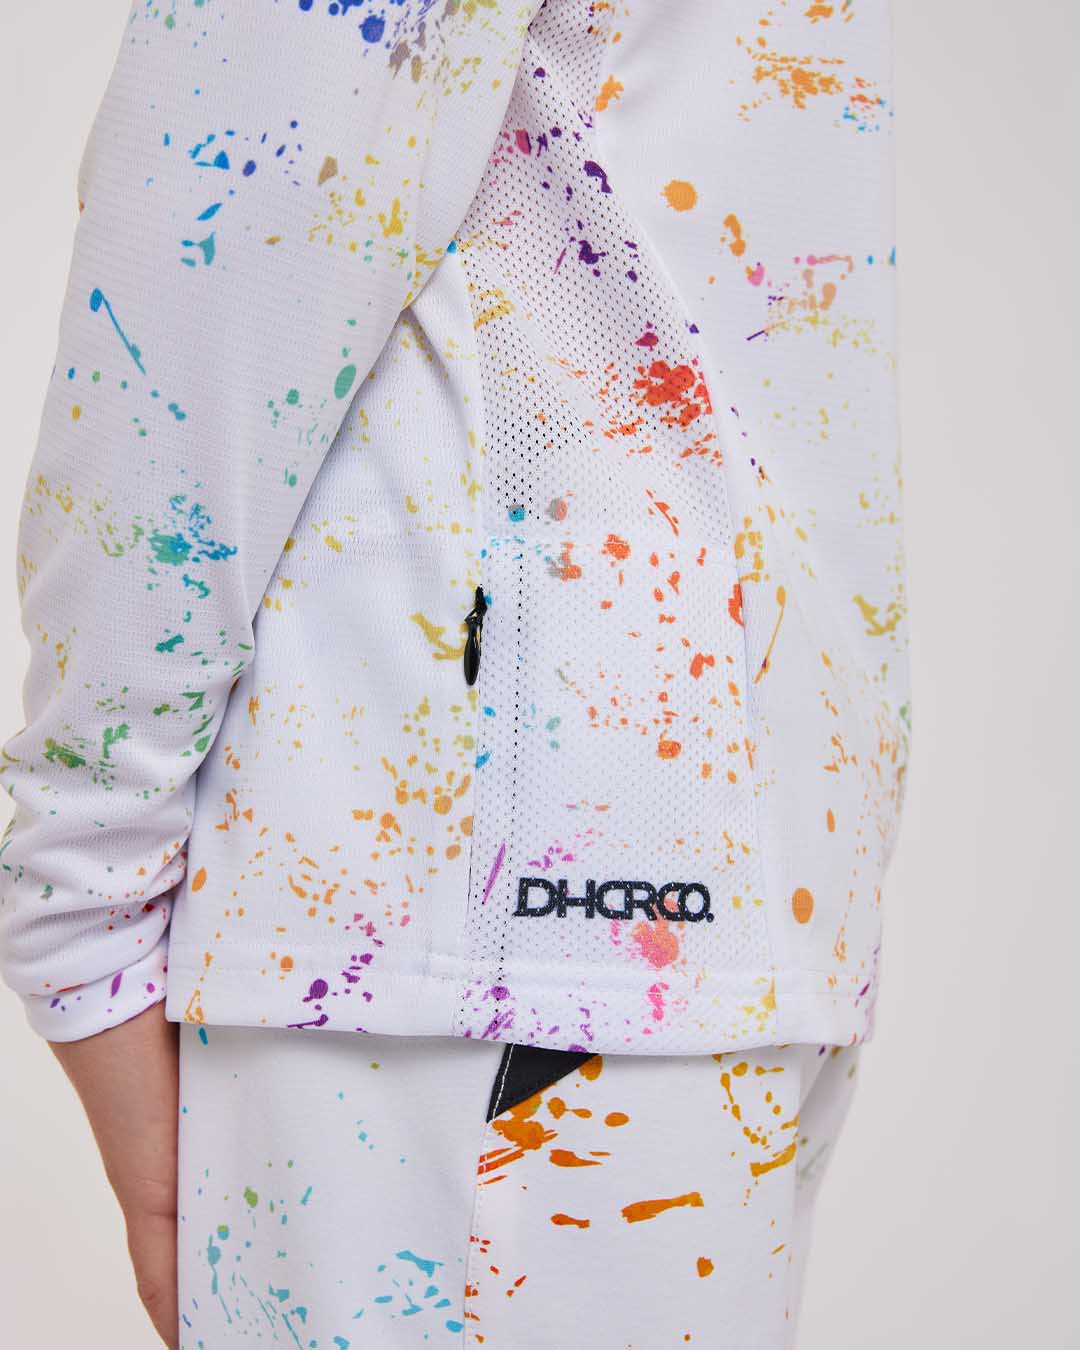 DHaRCO   YOUTH GRAVITY JERSEY  Paint splat